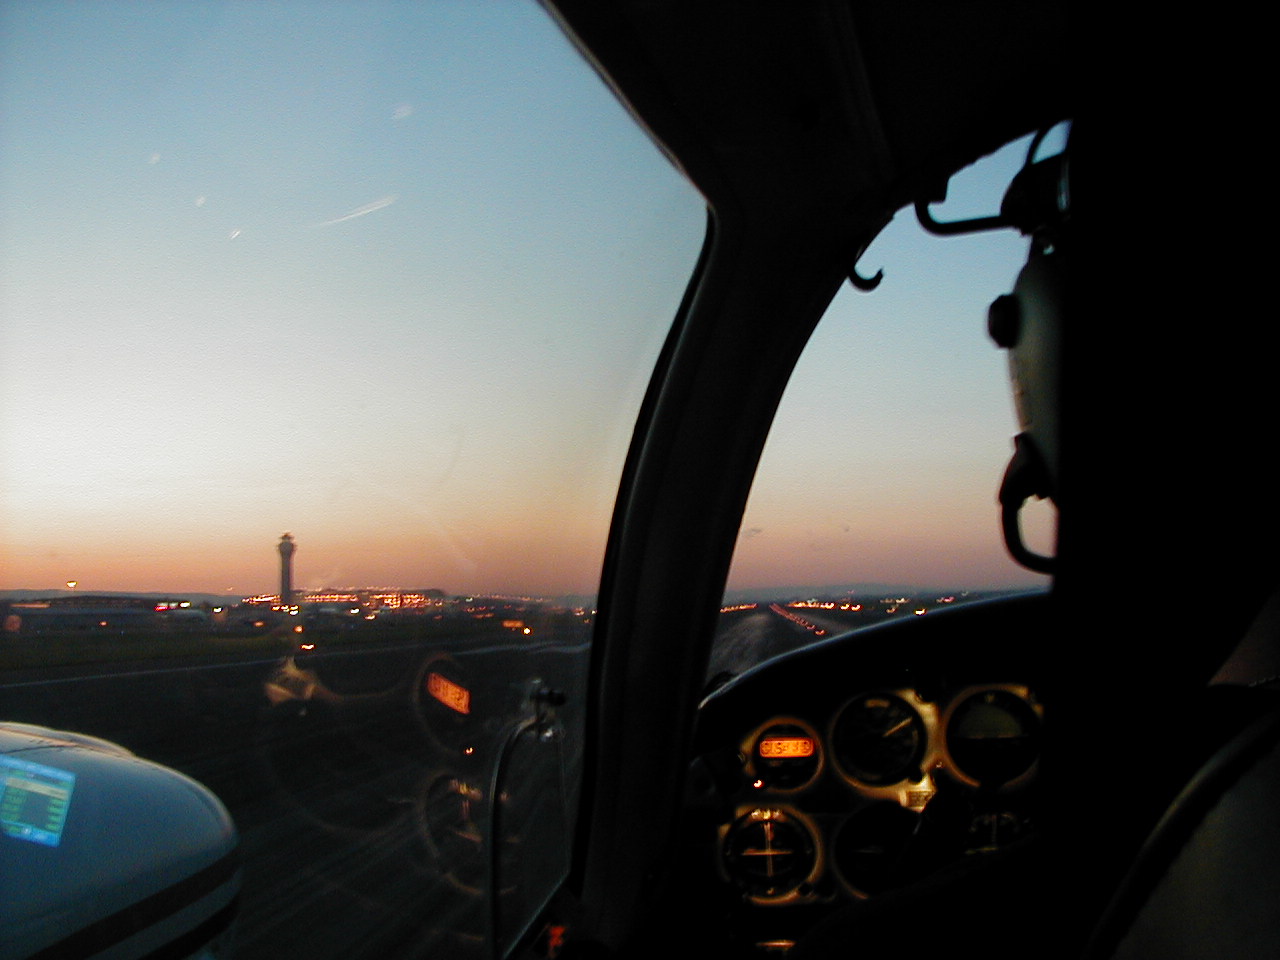 Langley Flying School's Piper Seneca during a twilight departure from Portand International Airport